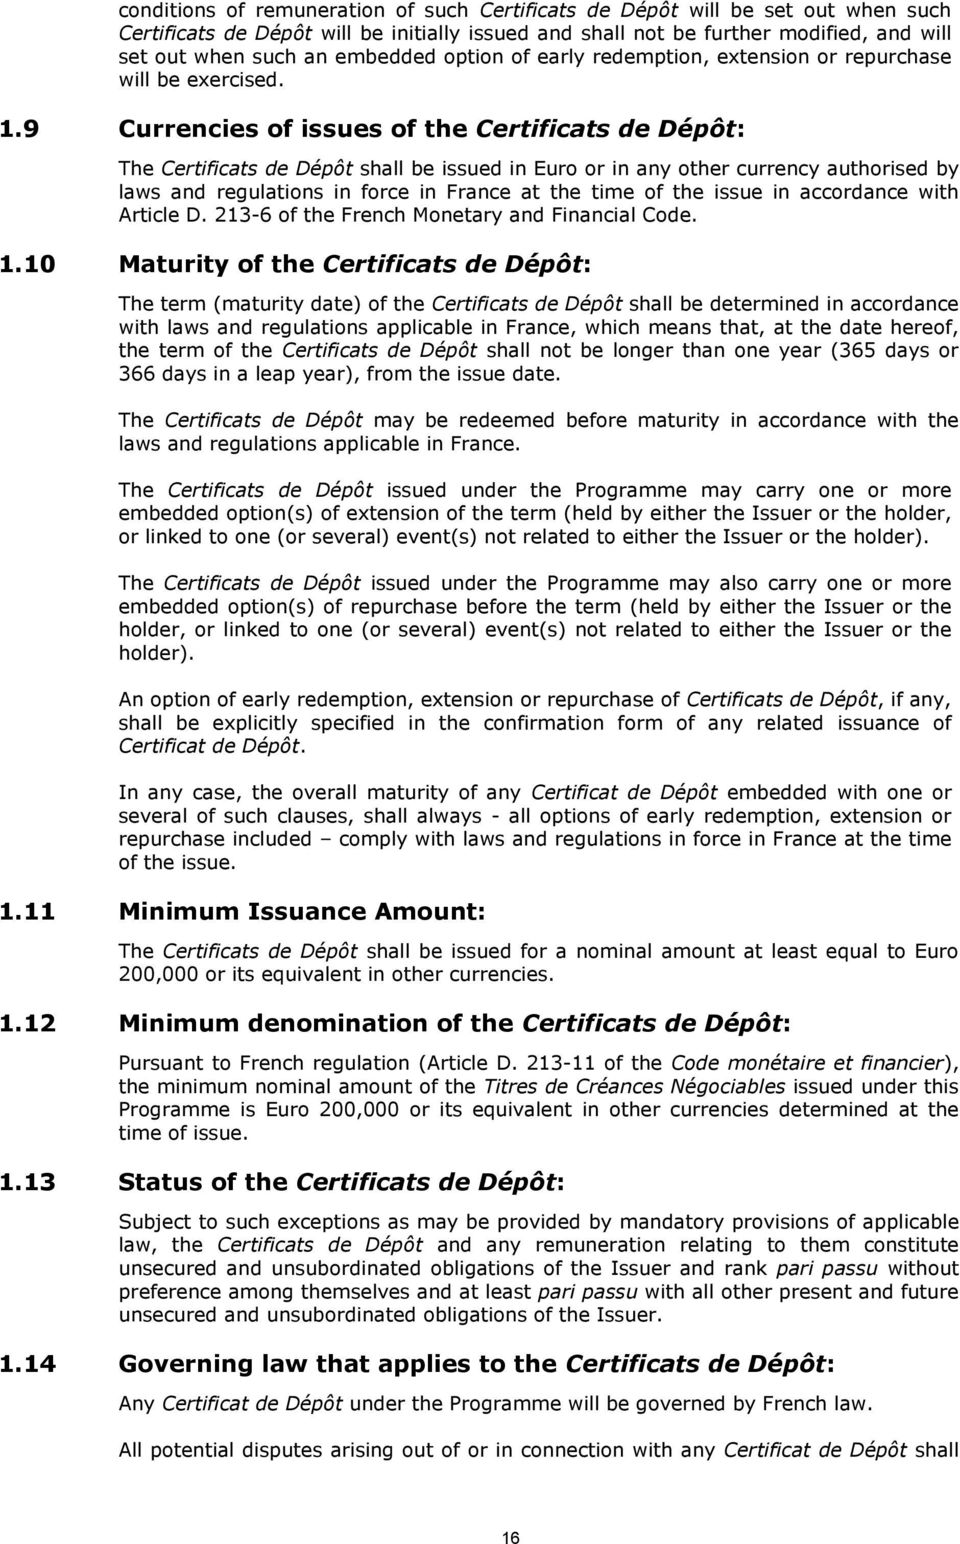 9 Currencies of issues of the Certificats de Dépôt: The Certificats de Dépôt shall be issued in Euro or in any other currency authorised by laws and regulations in force in France at the time of the